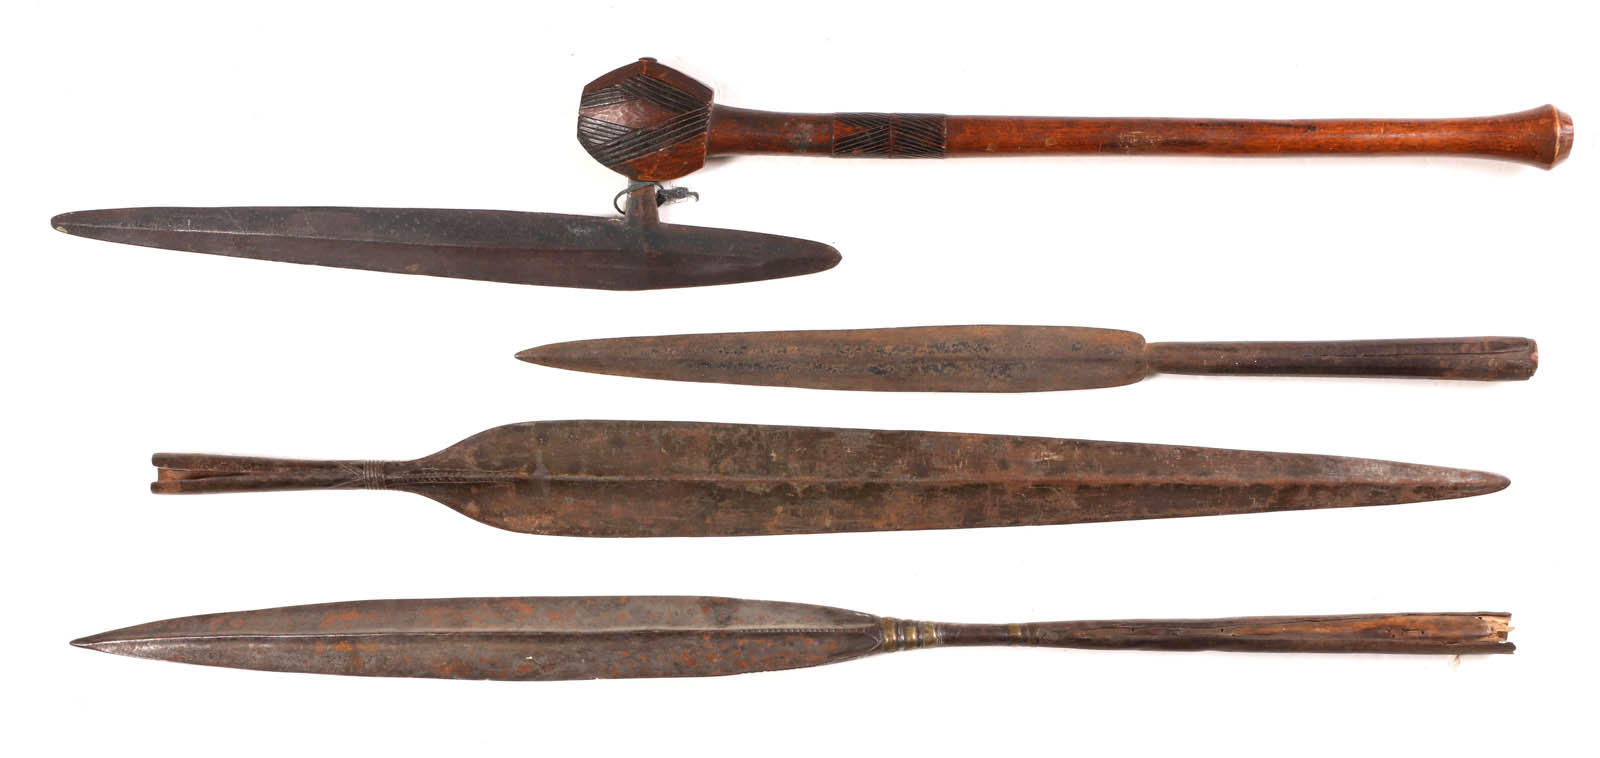 AN AFRICAN STABBING AXE AND THREE SPEAR HEADS